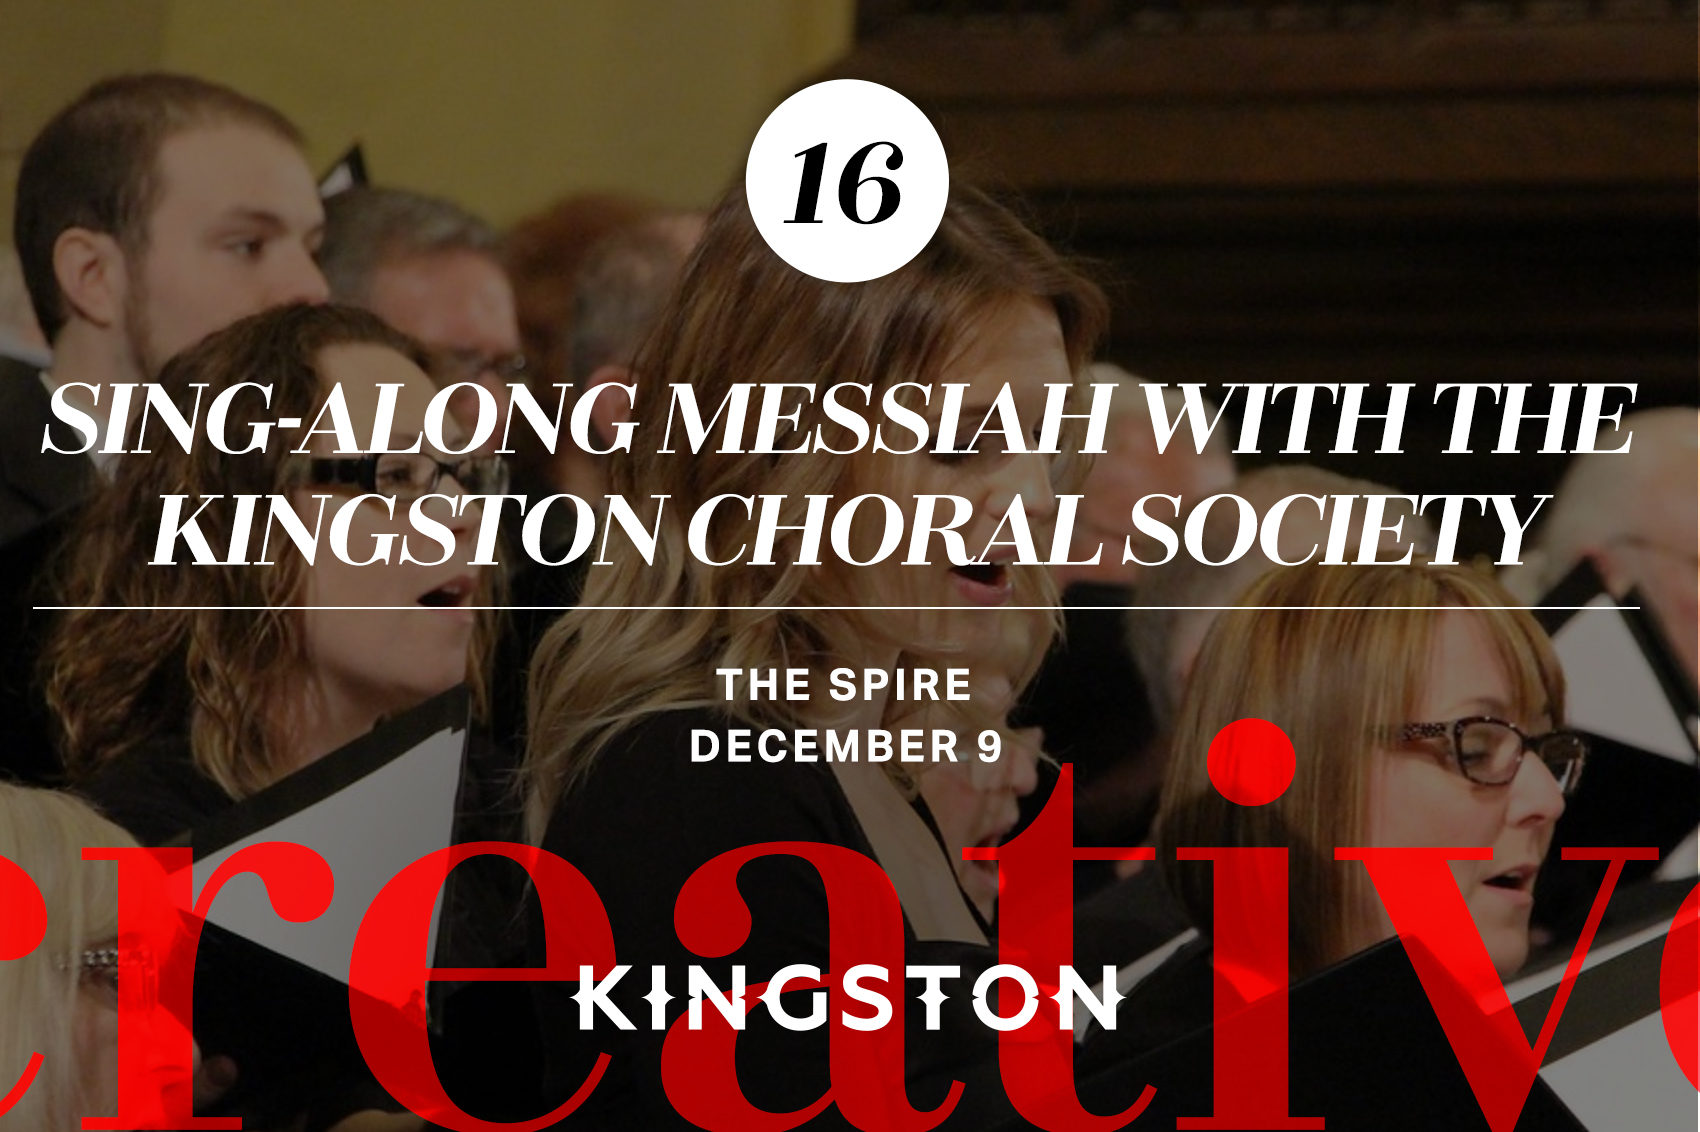 Sing-along Messiah with the Kingston Choral Society